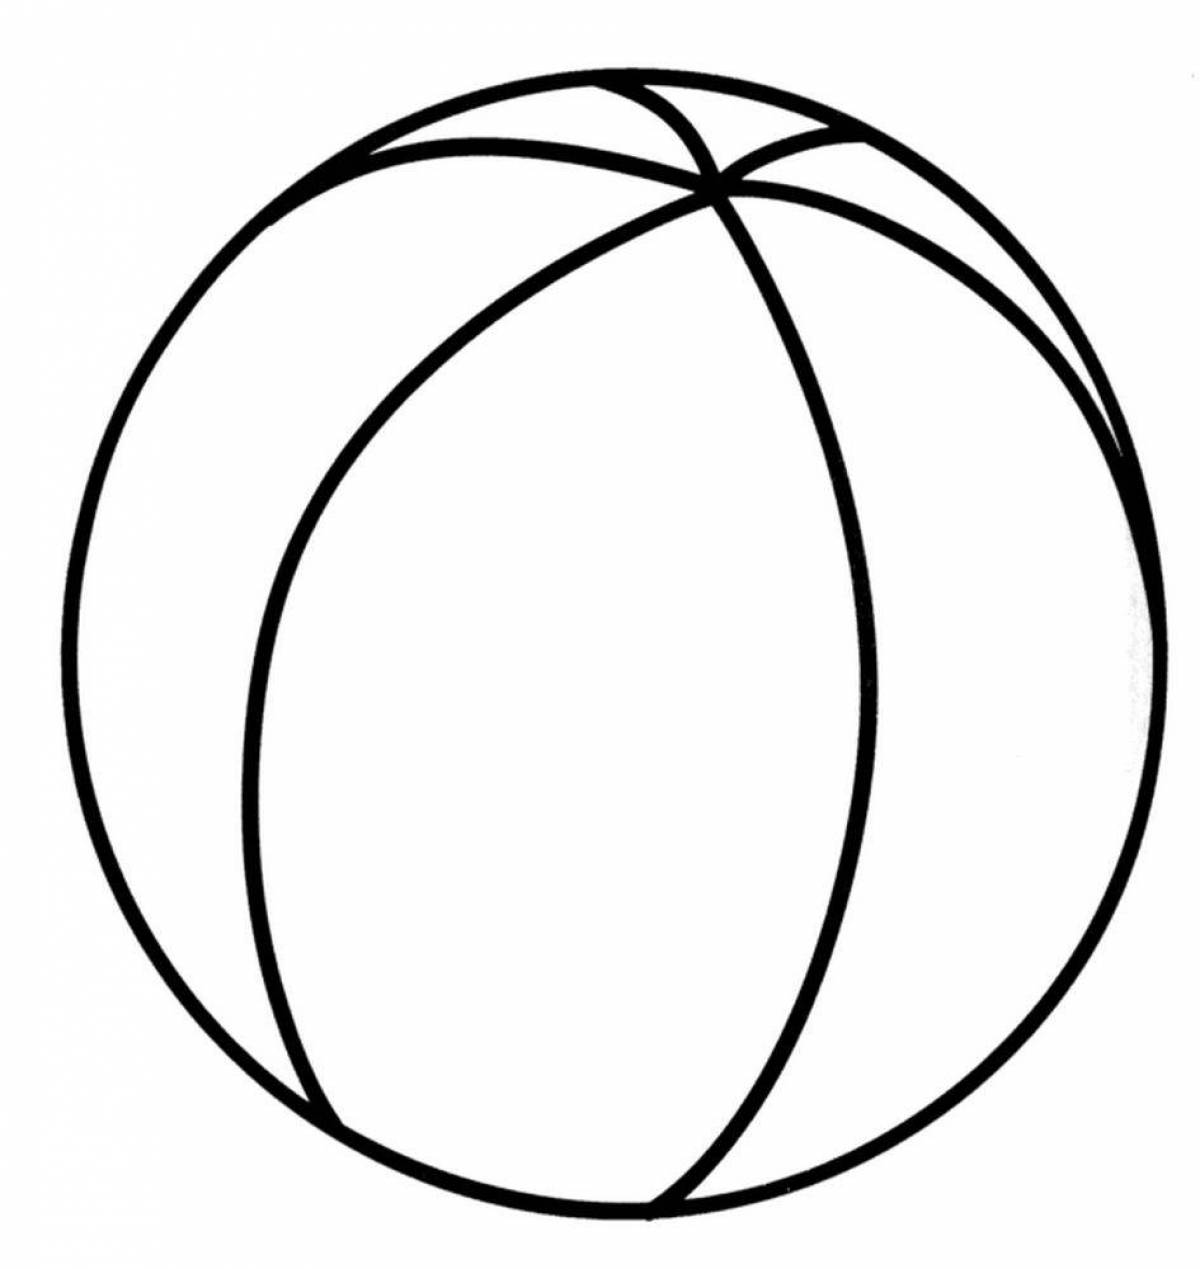 Coloring page excited ball for kids